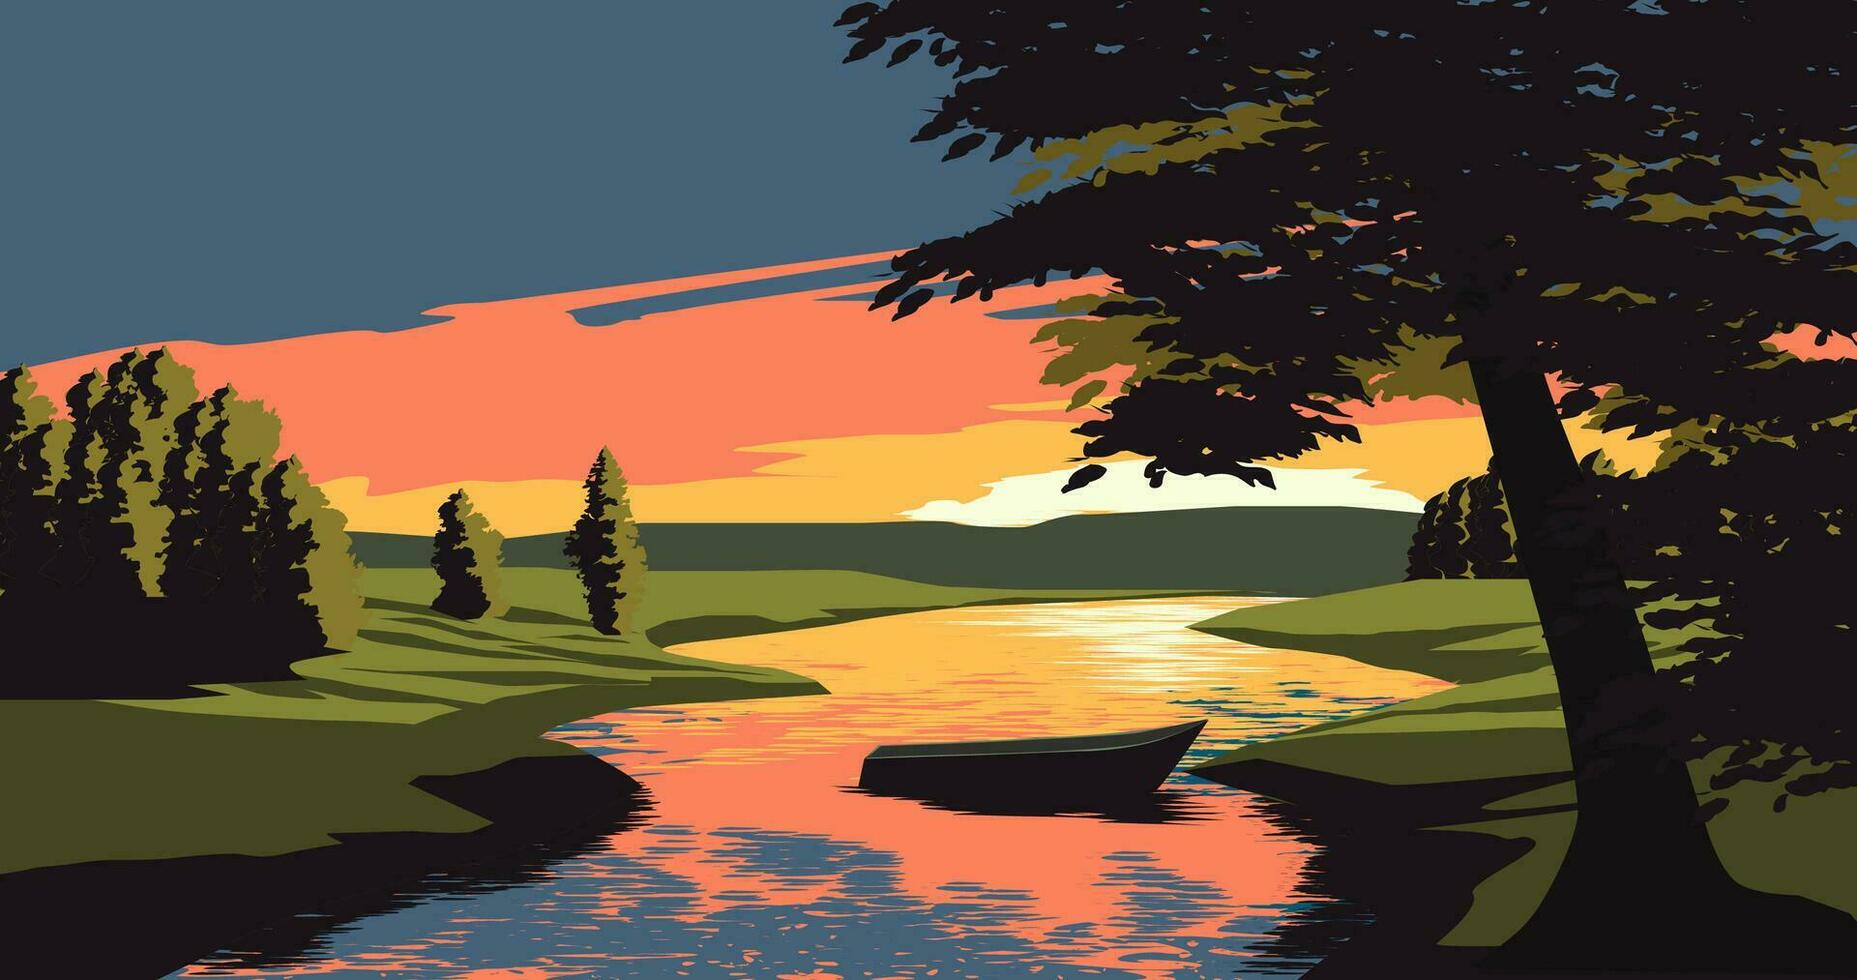 Beautiful river sunset landscape with an empty boat in the rive vector